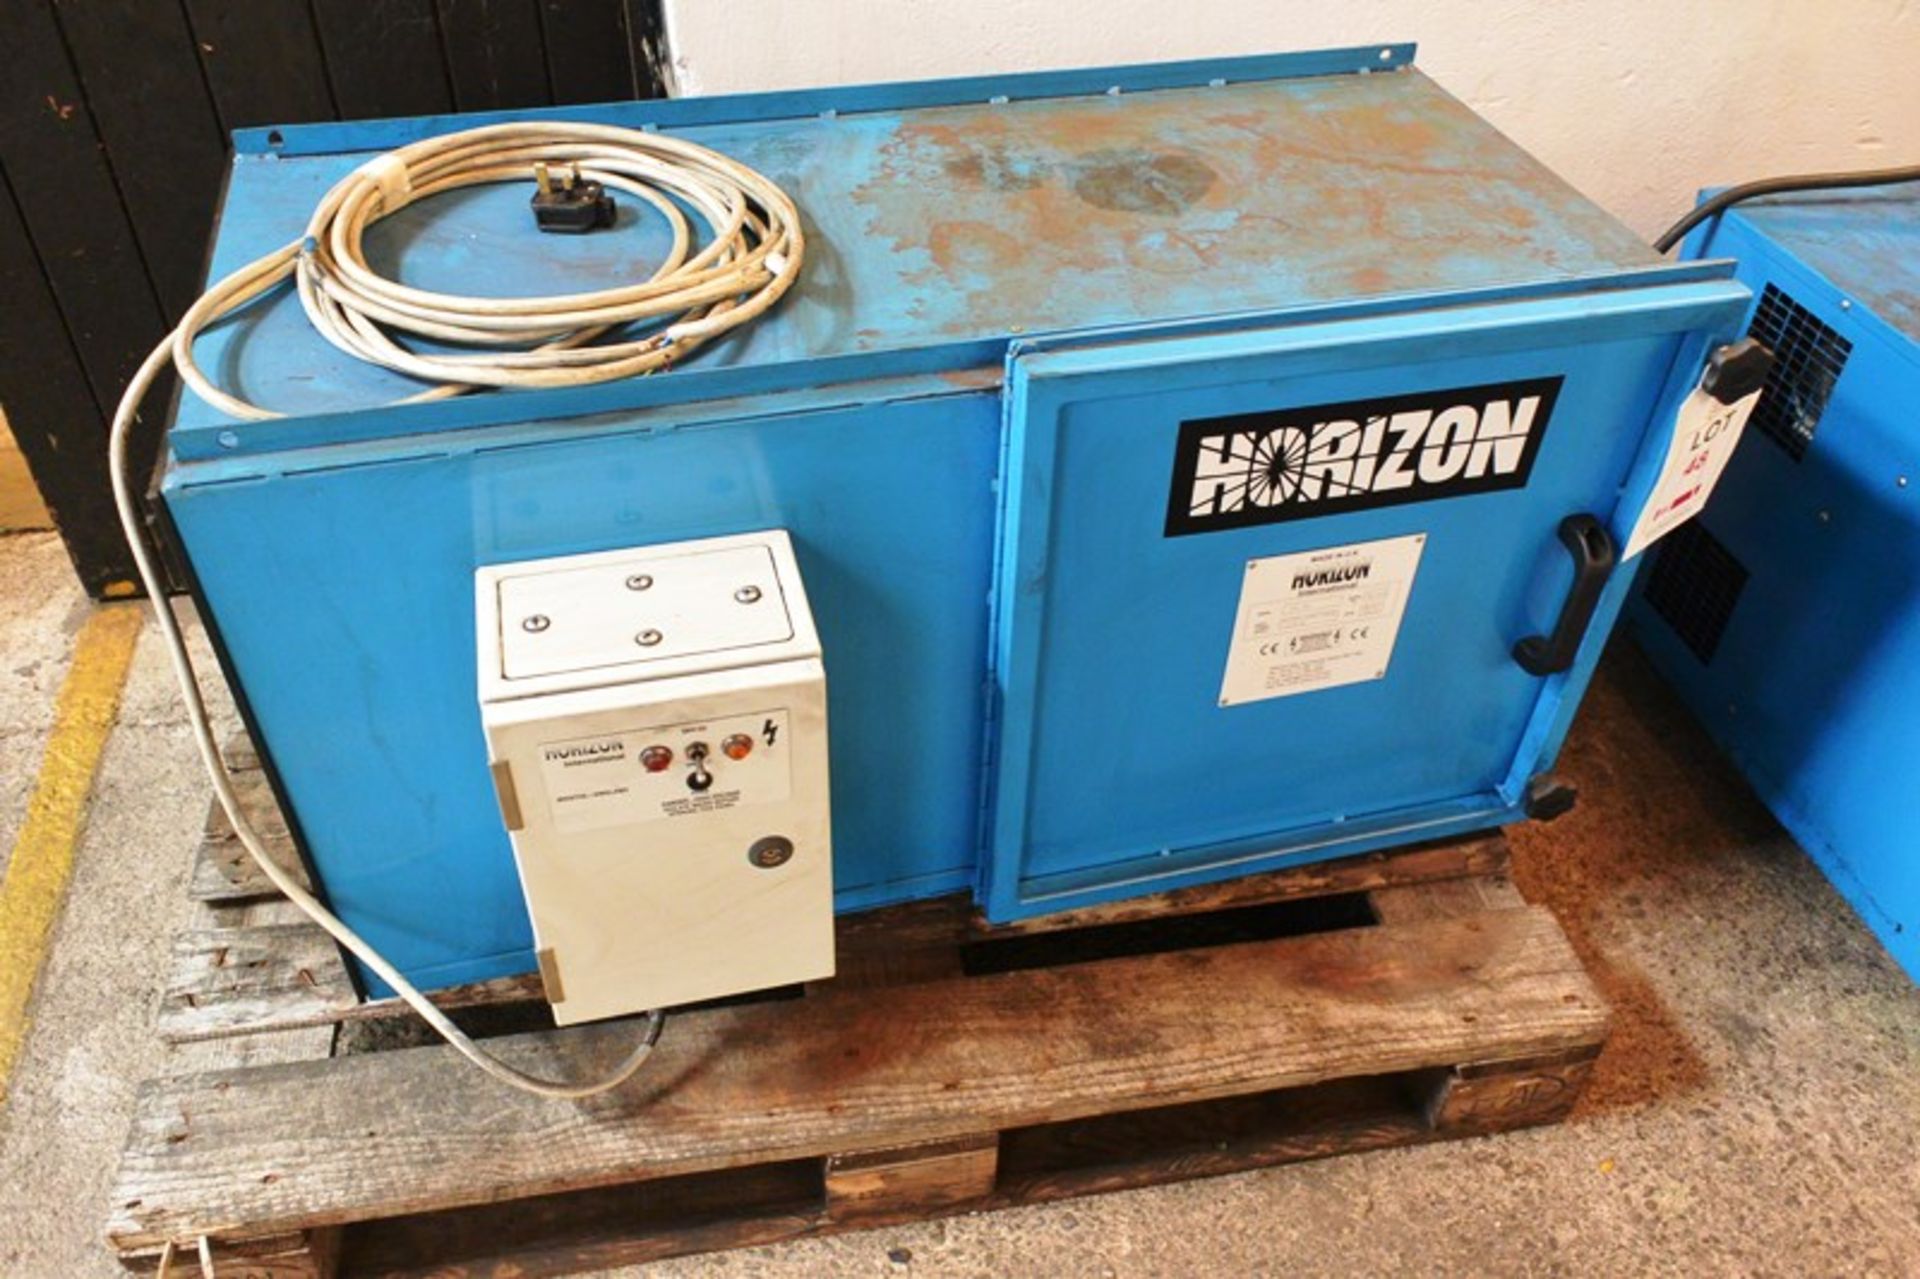 Horizon SE11 electric space heating unit, serial no. 10102 (2018) (Recommended collection period for